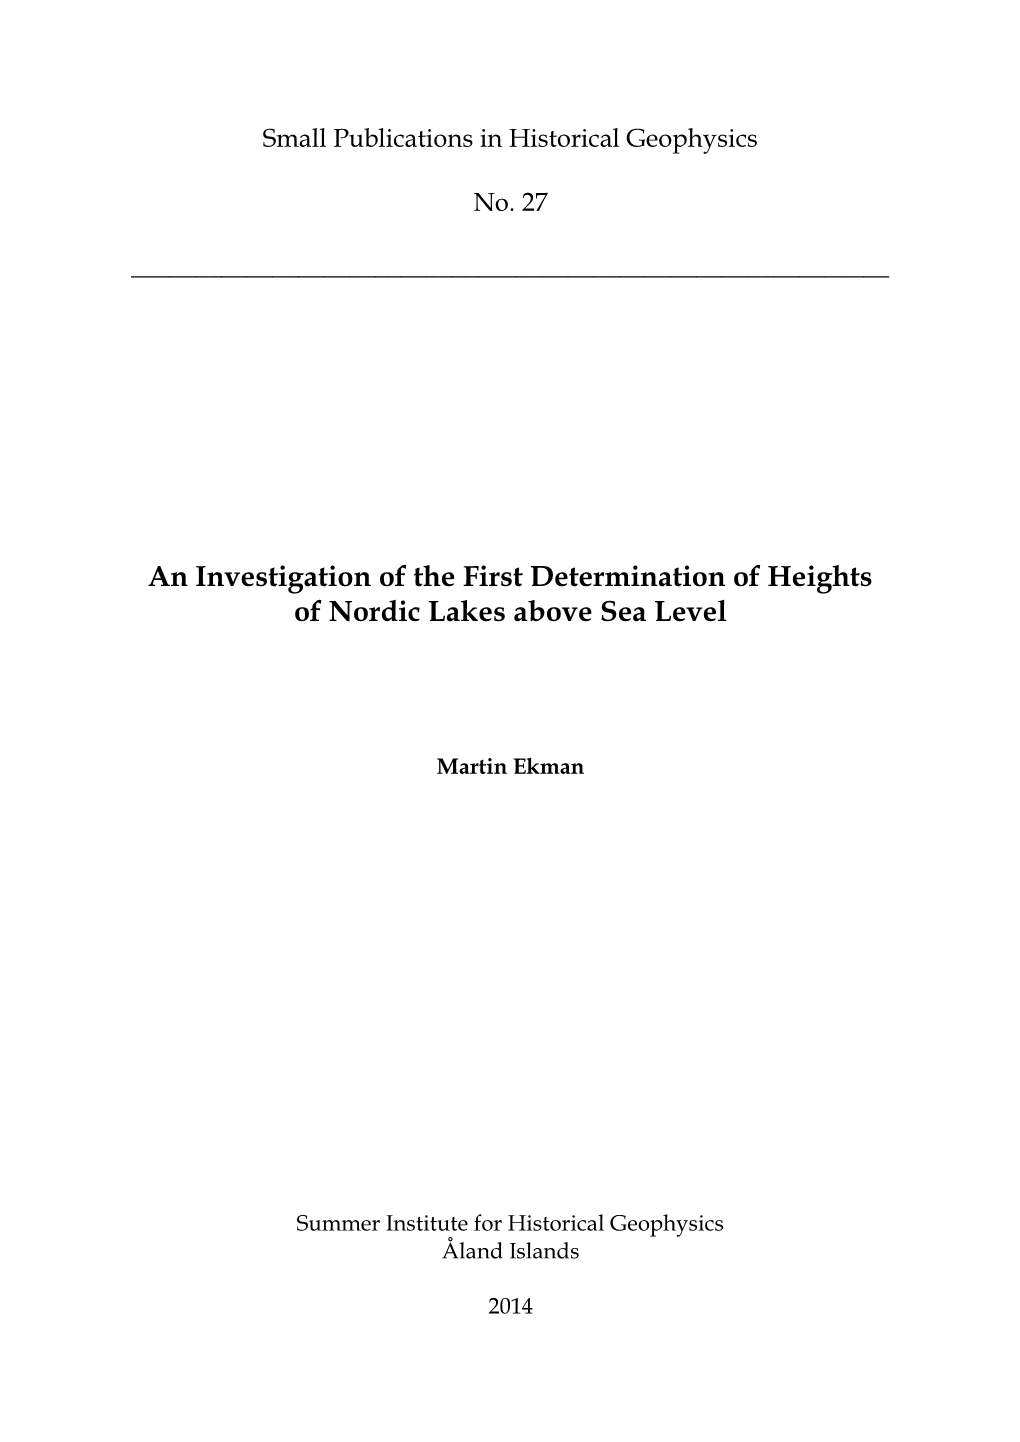 An Investigation of the First Determination of Heights of Nordic Lakes Above Sea Level